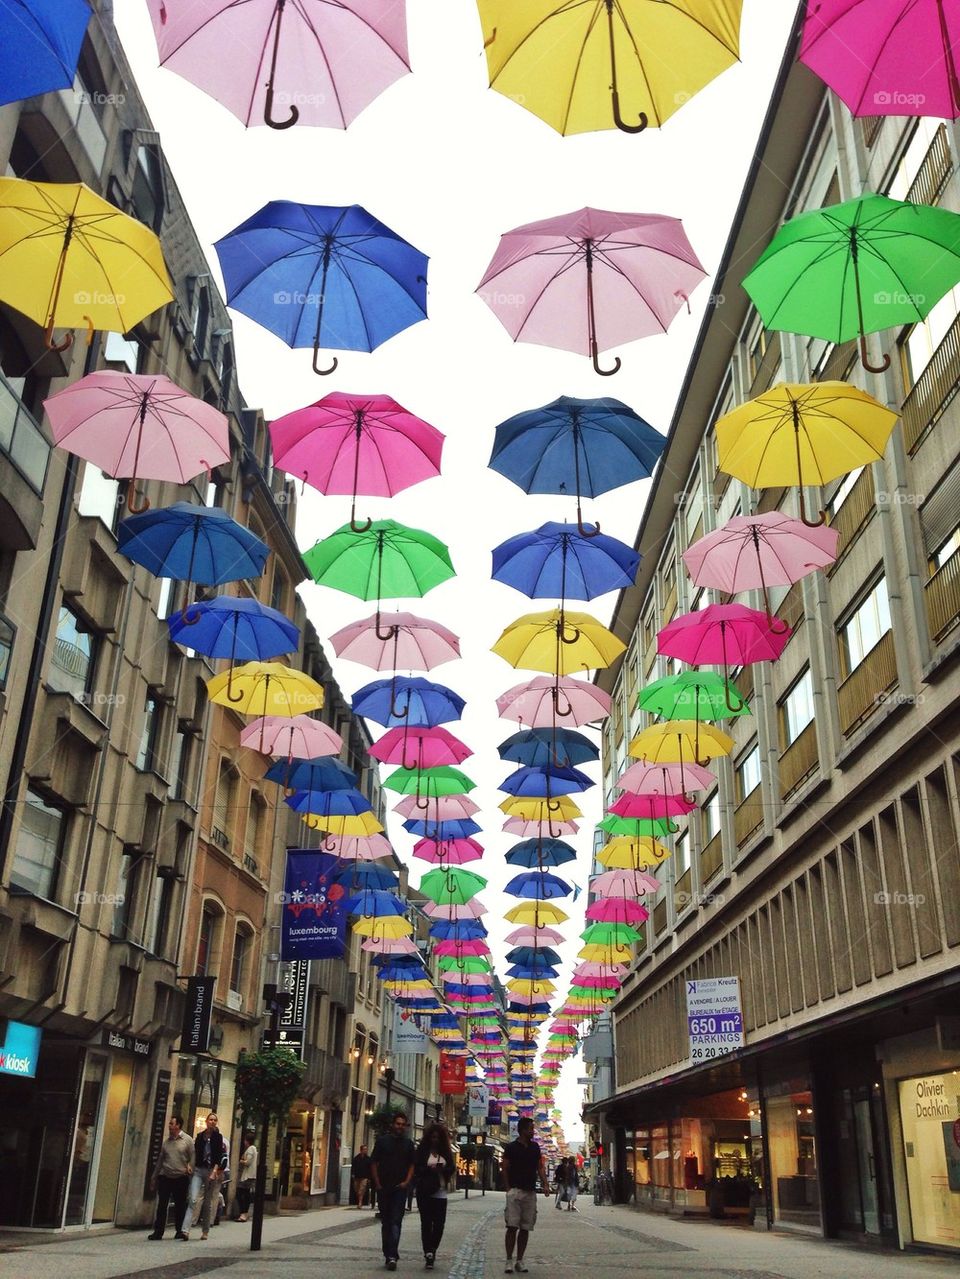 Luxembourg City centre- the street with the umbrellas